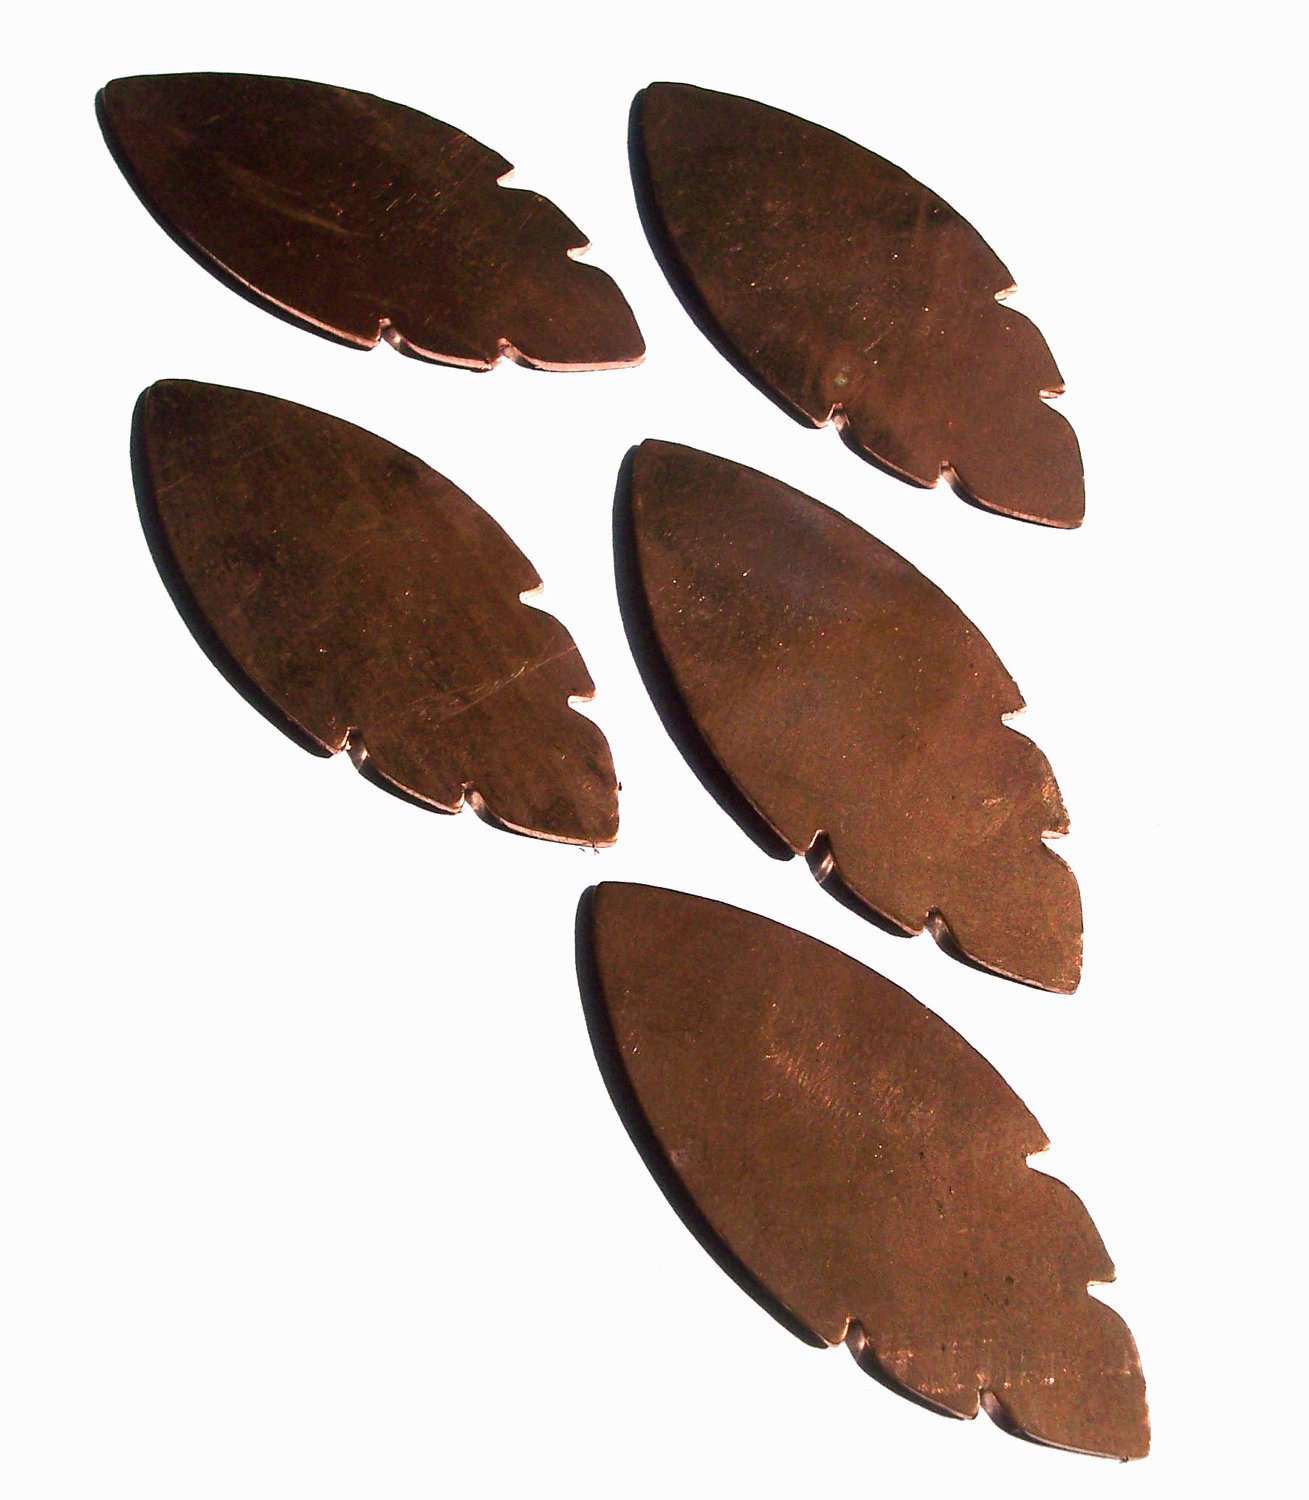 Large Leaf 47mm x 19mm Blank Cutout for Enameling Stamping Texturing Blanks  - 4  Pieces